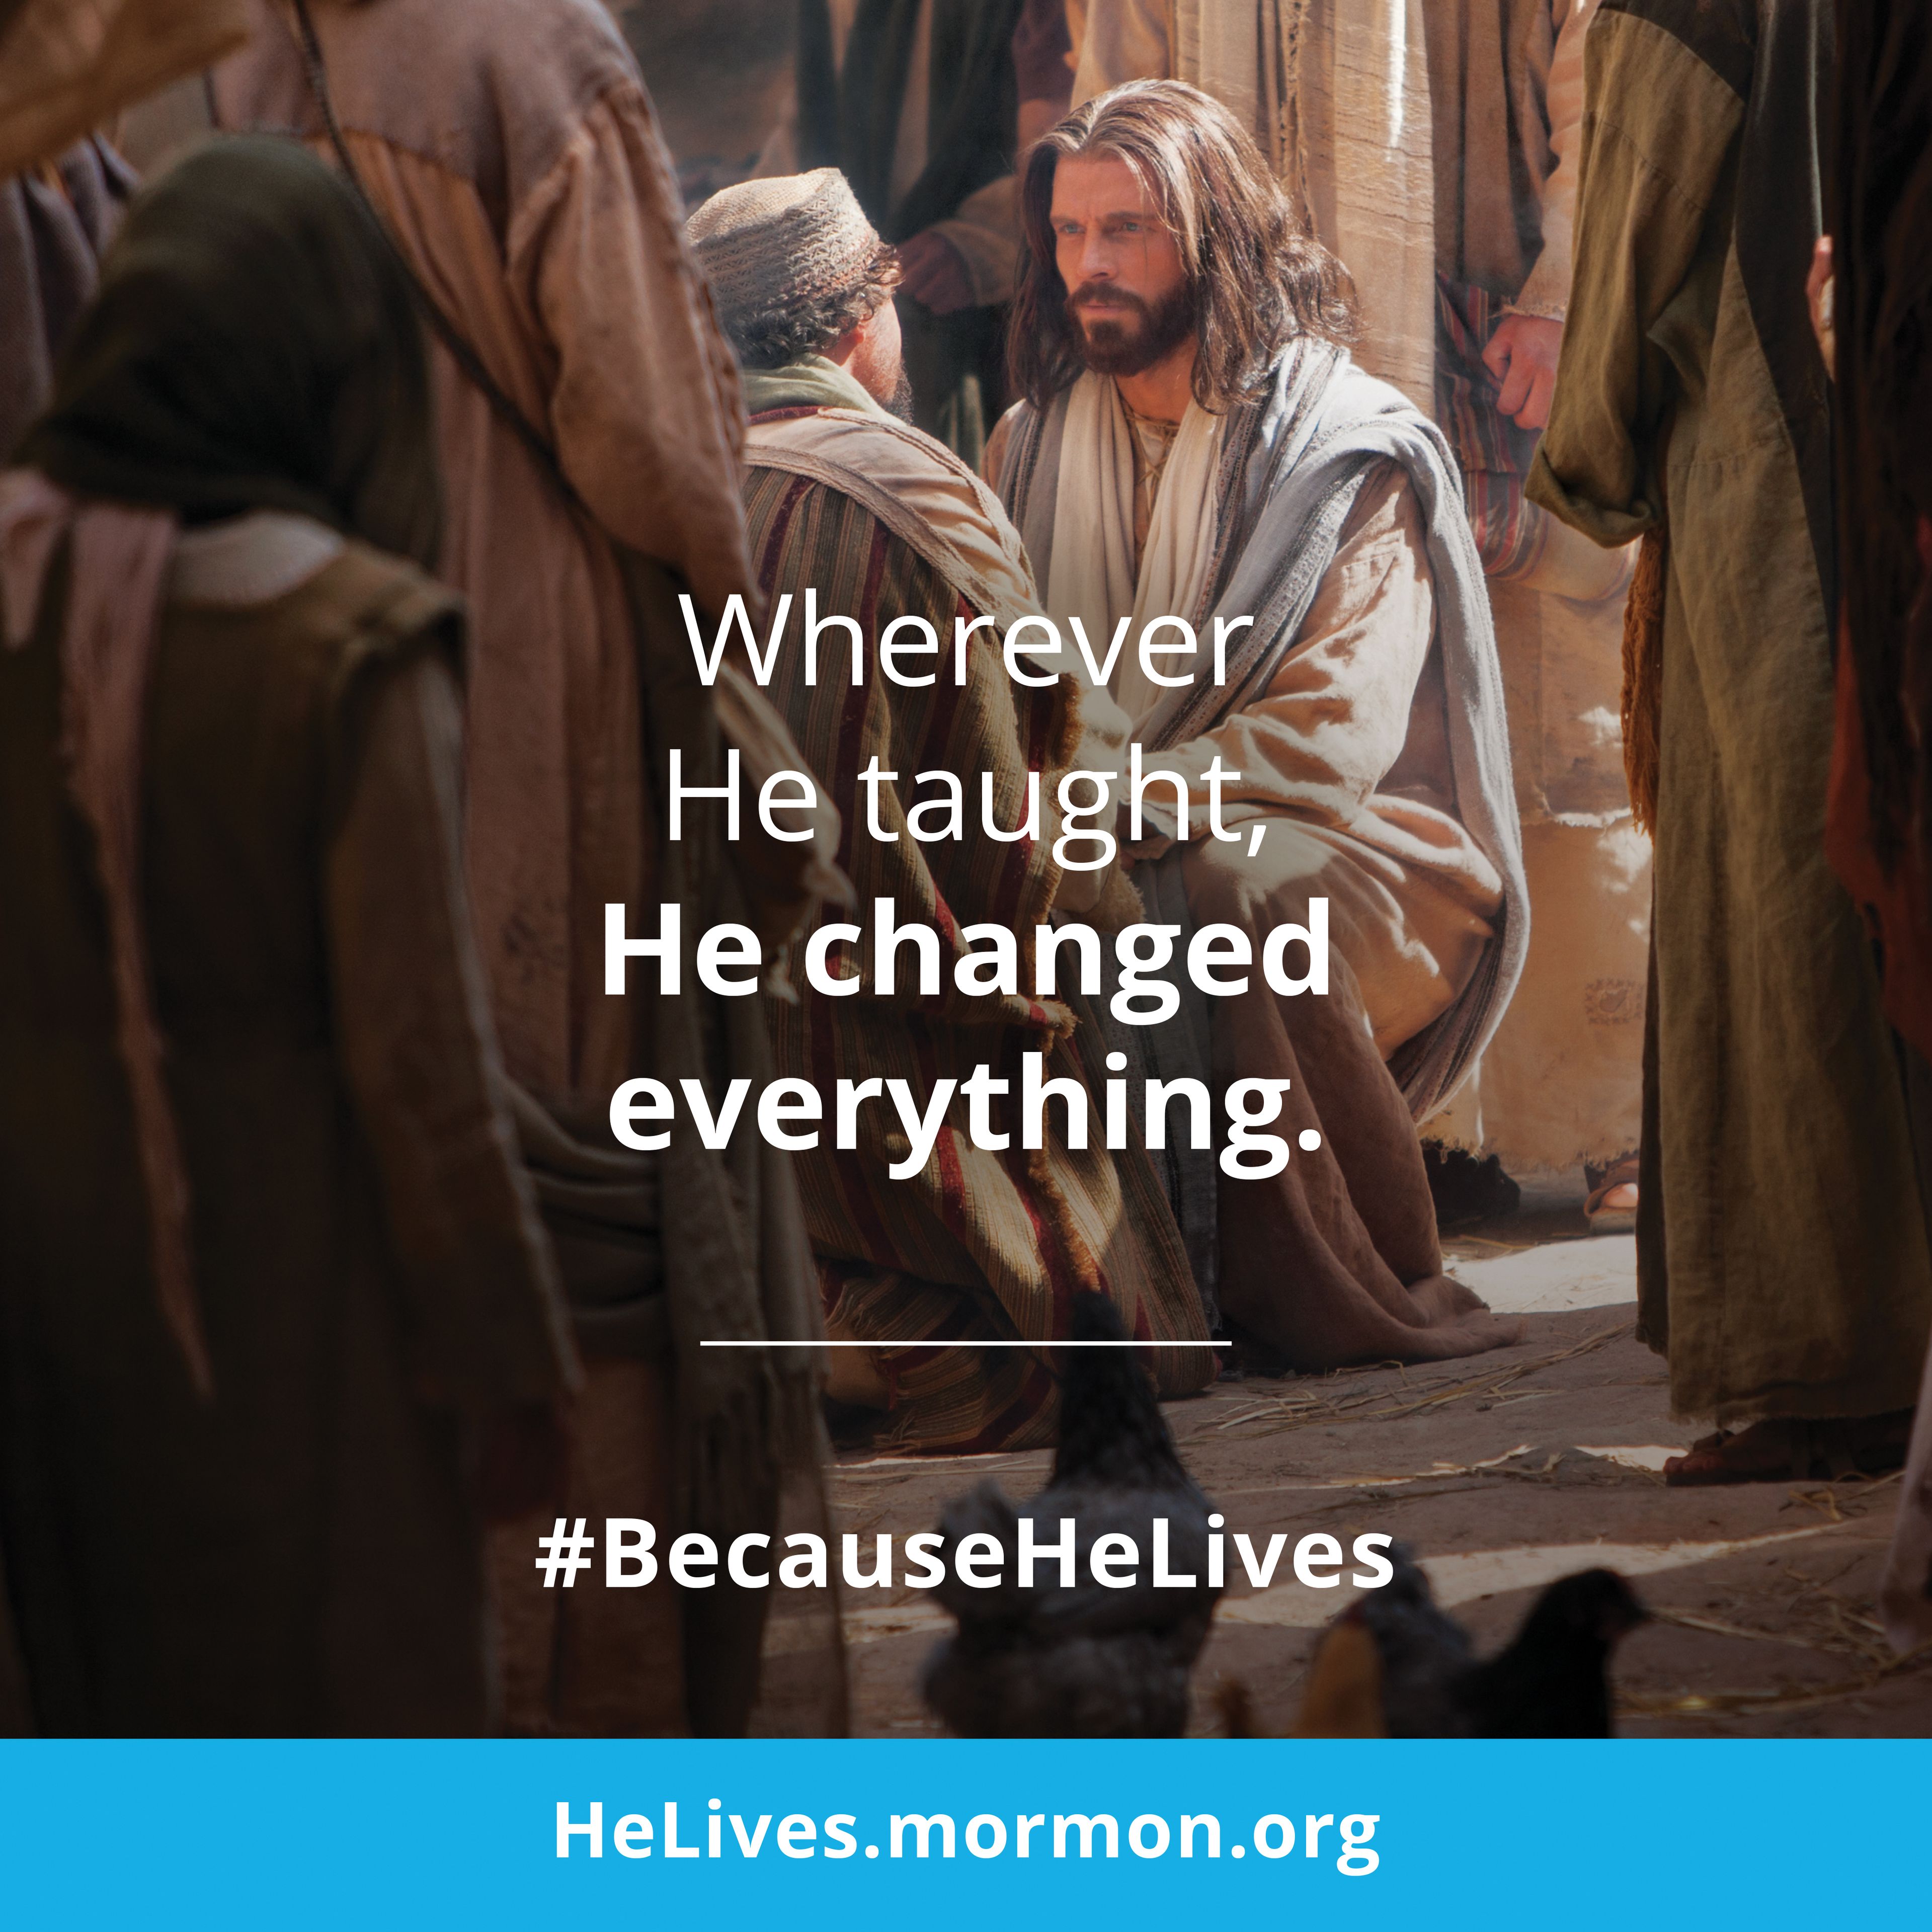 Wherever He taught, He changed everything. #BecauseHeLives, HeLives.mormon.org